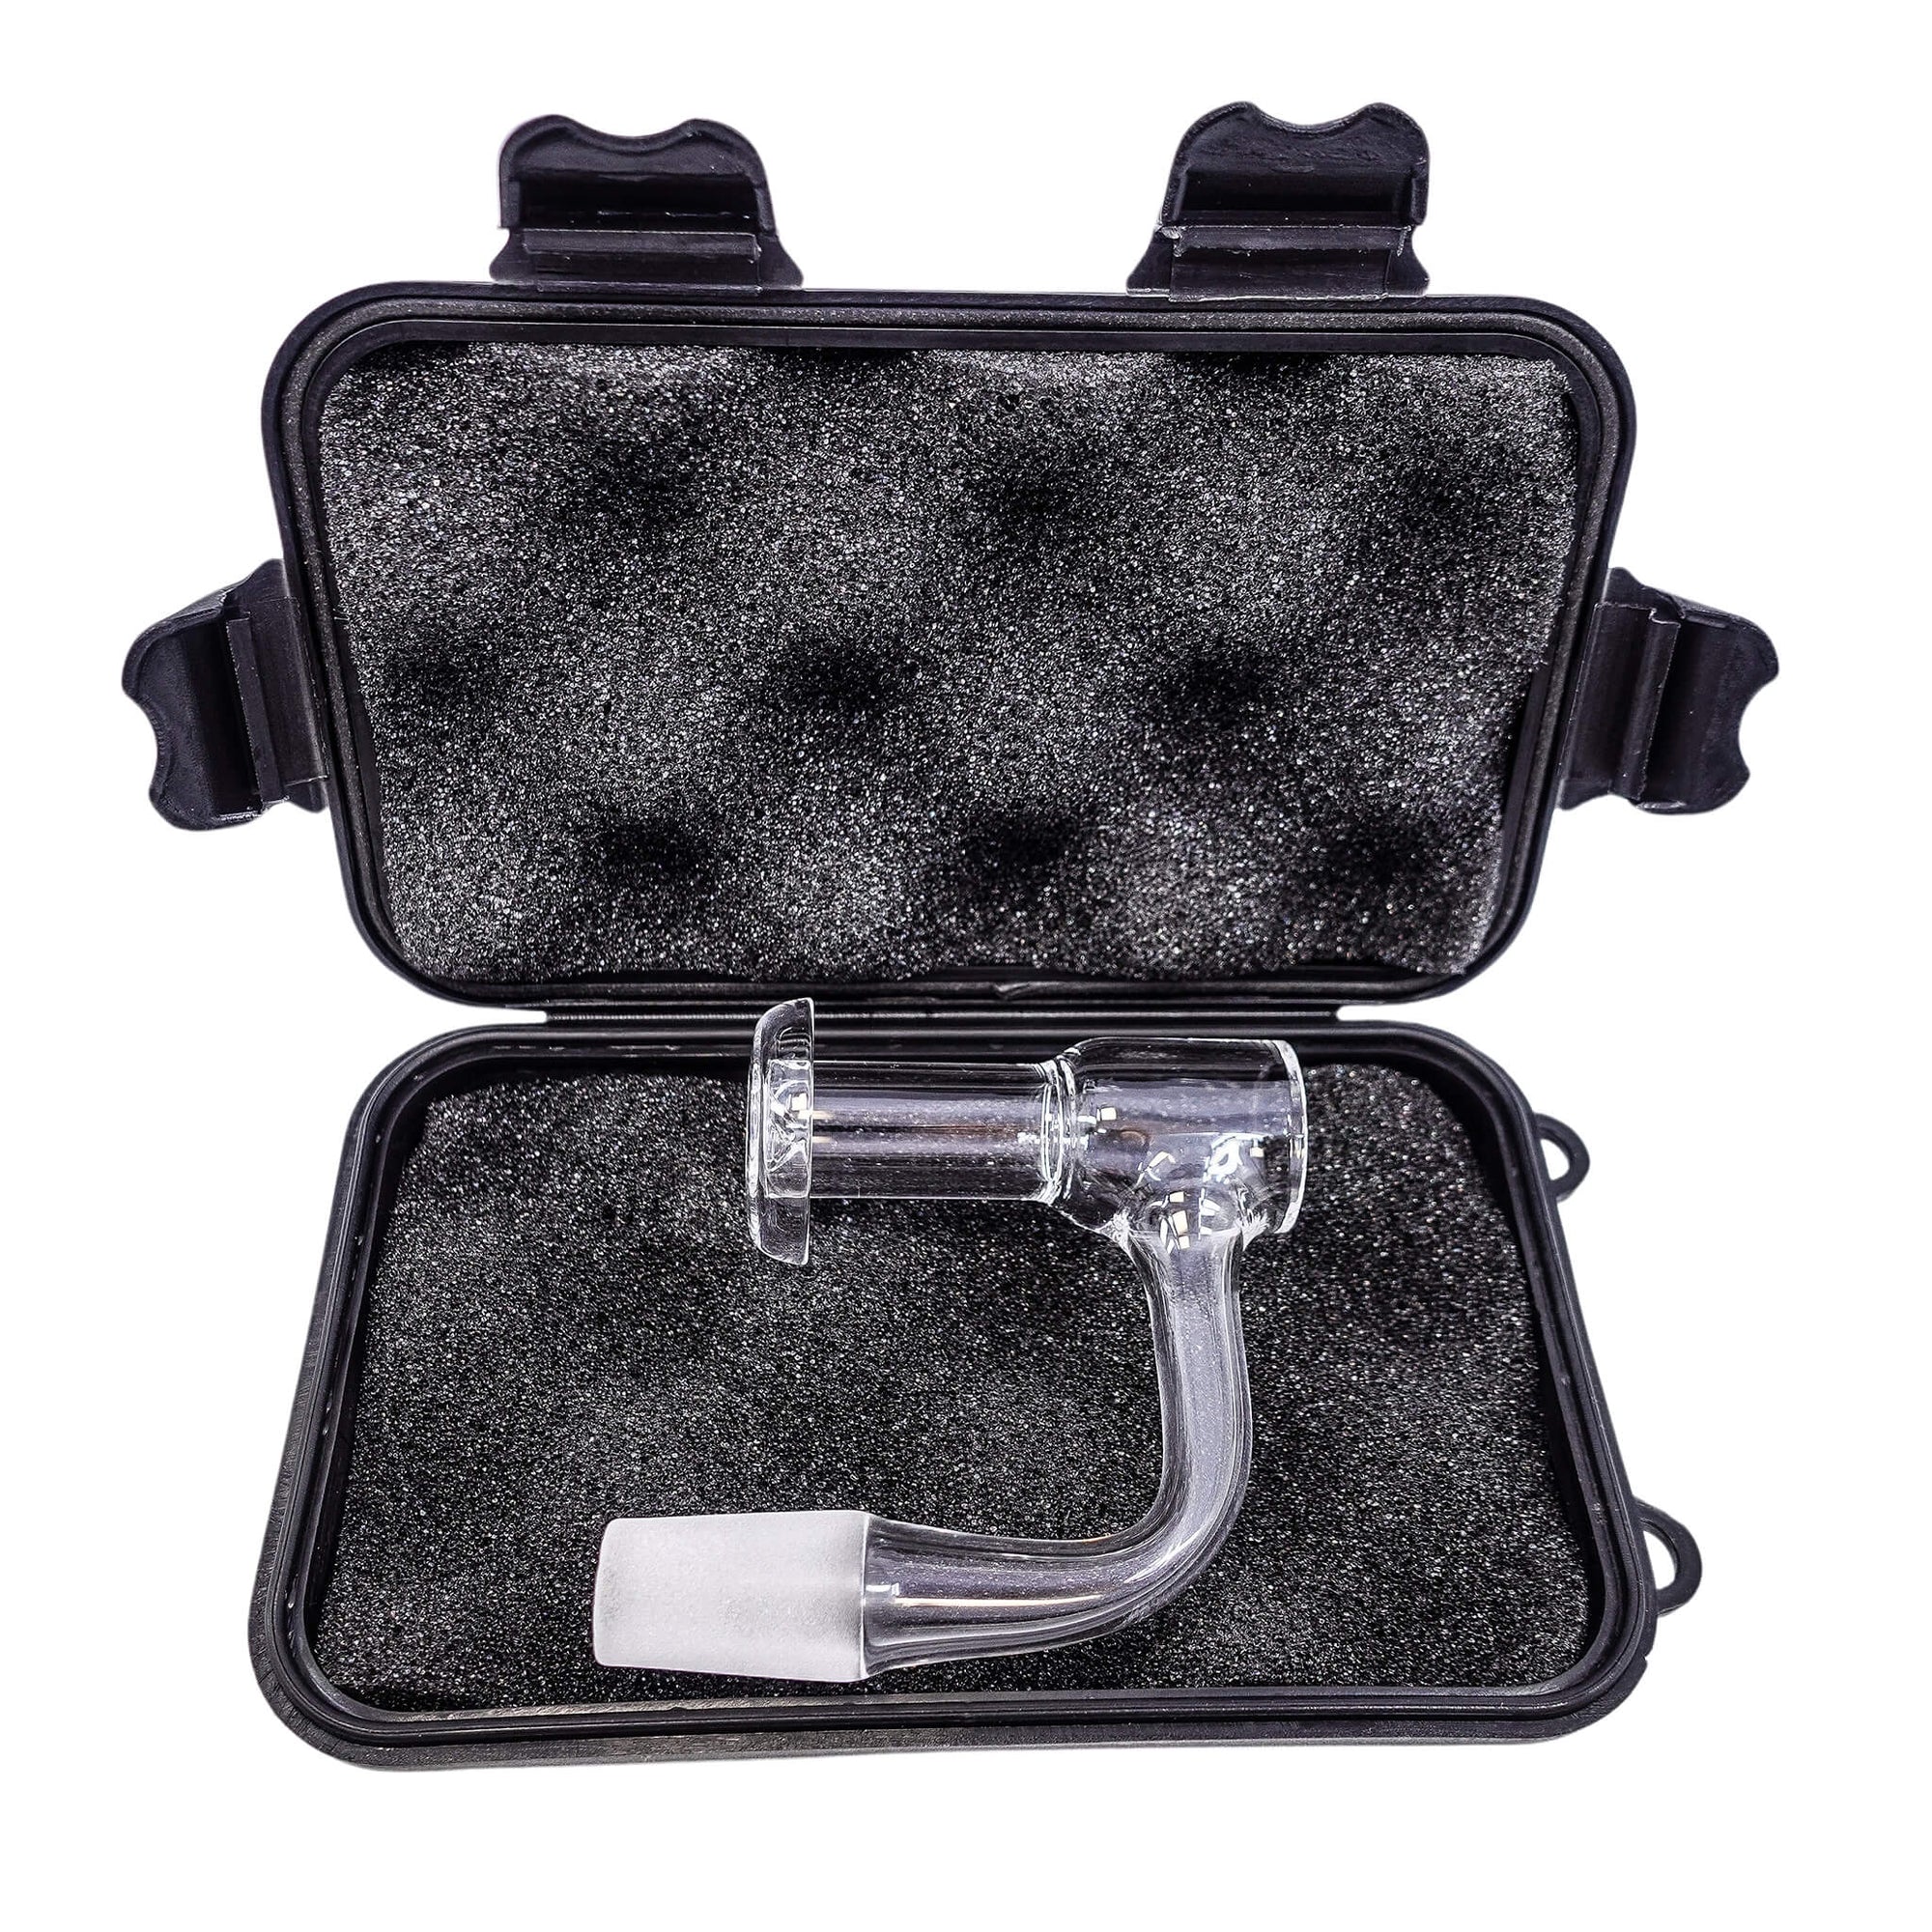 Small Hard Shell Banger Case | Open Angled View With Terp Slurper In Case | the dabbing specialists